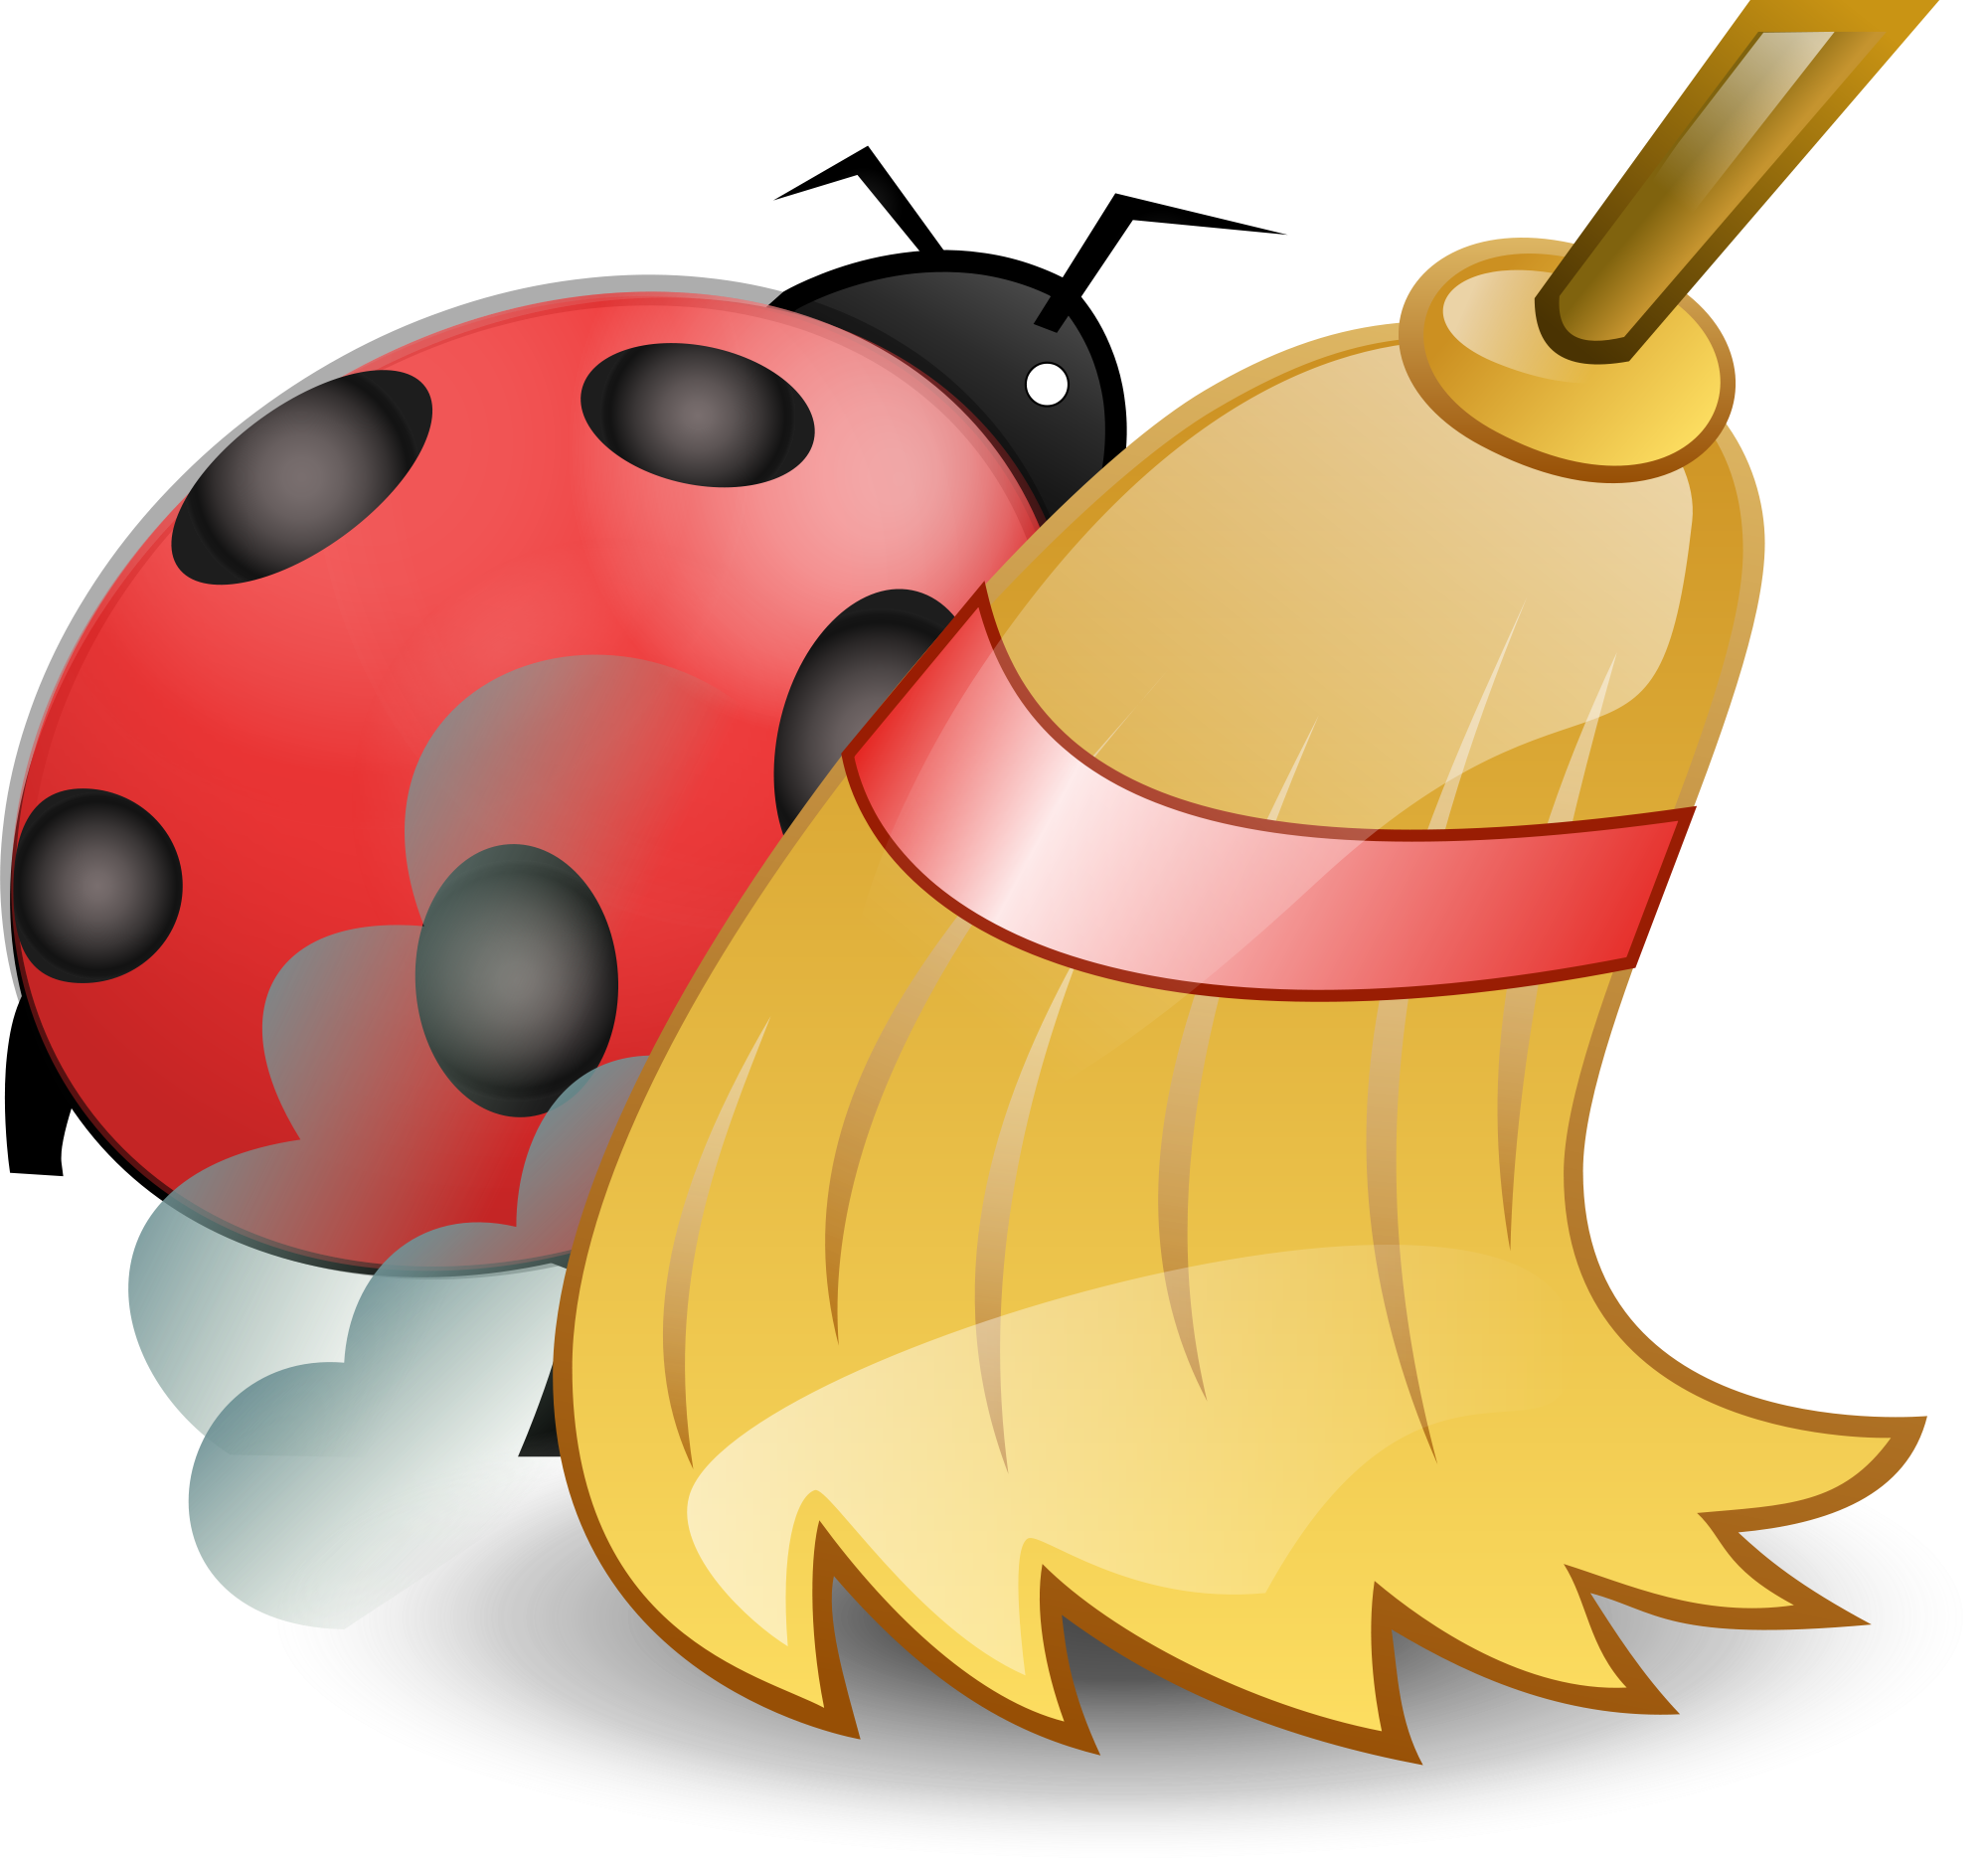 Nuvola apps bug and broom.svg.png